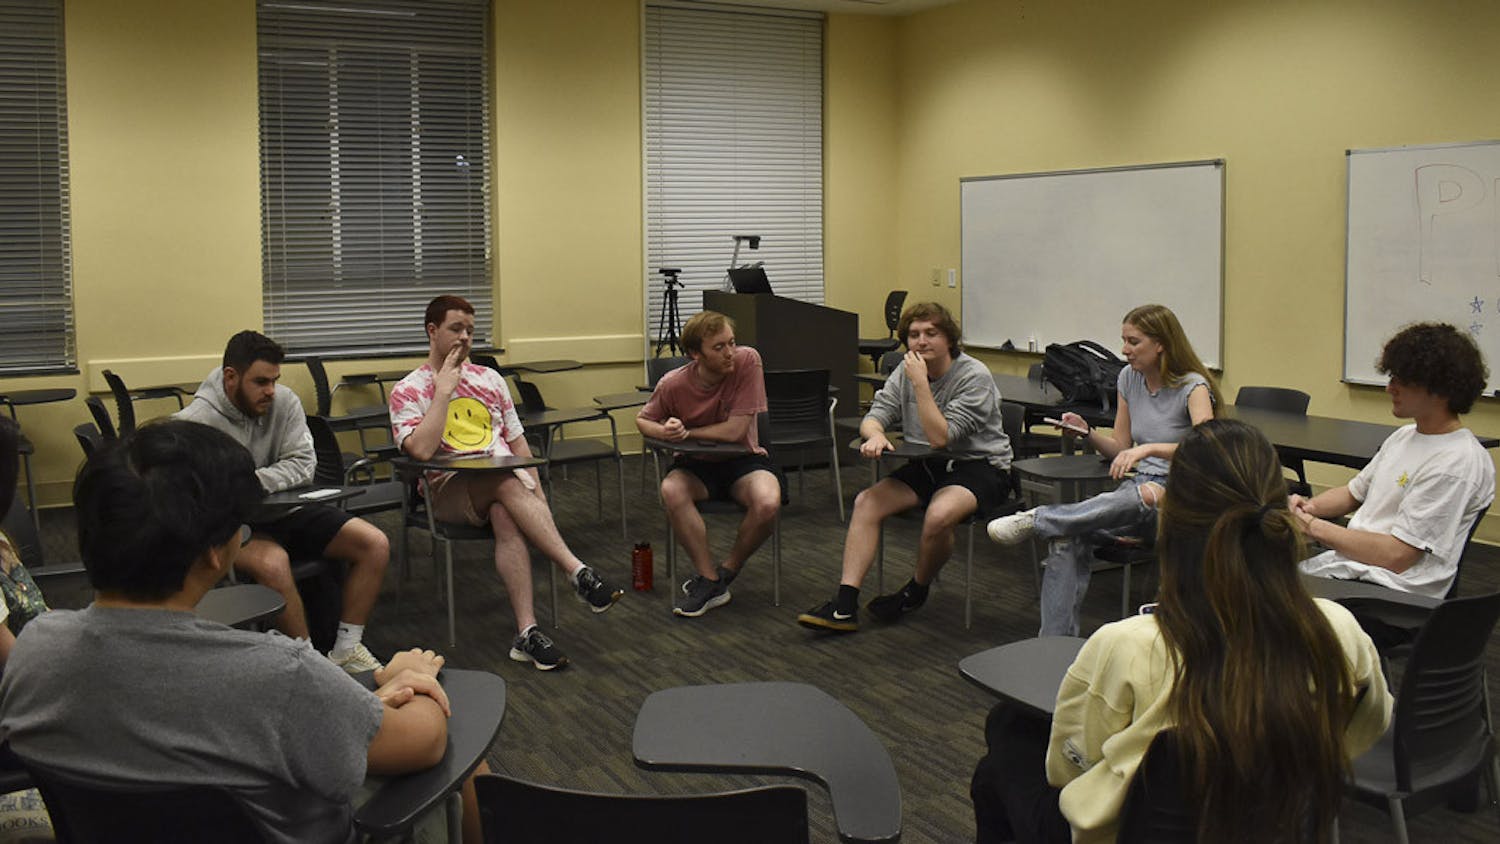 The Carolina Philosophy Club engages in a discussion about social norms on Feb. 21, 2023. The club is open to all USC students and meets on Tuesdays at 7 p.m. in Petigru 213.